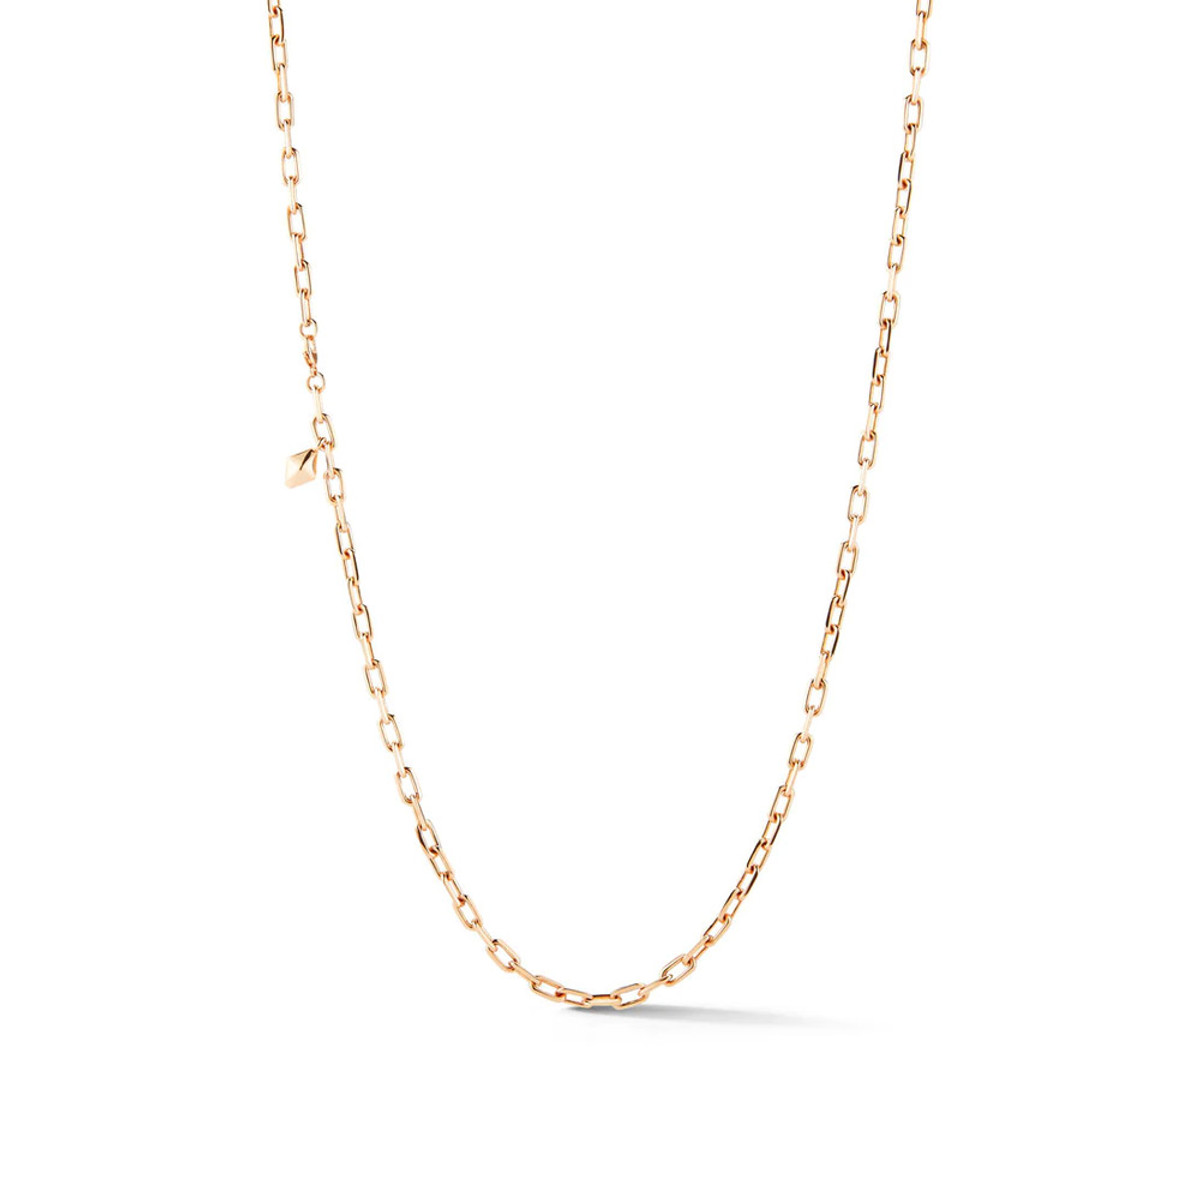 Walters Faith Saxon 18K Rose Gold Chain Necklace with Origami Hang Tag-56958